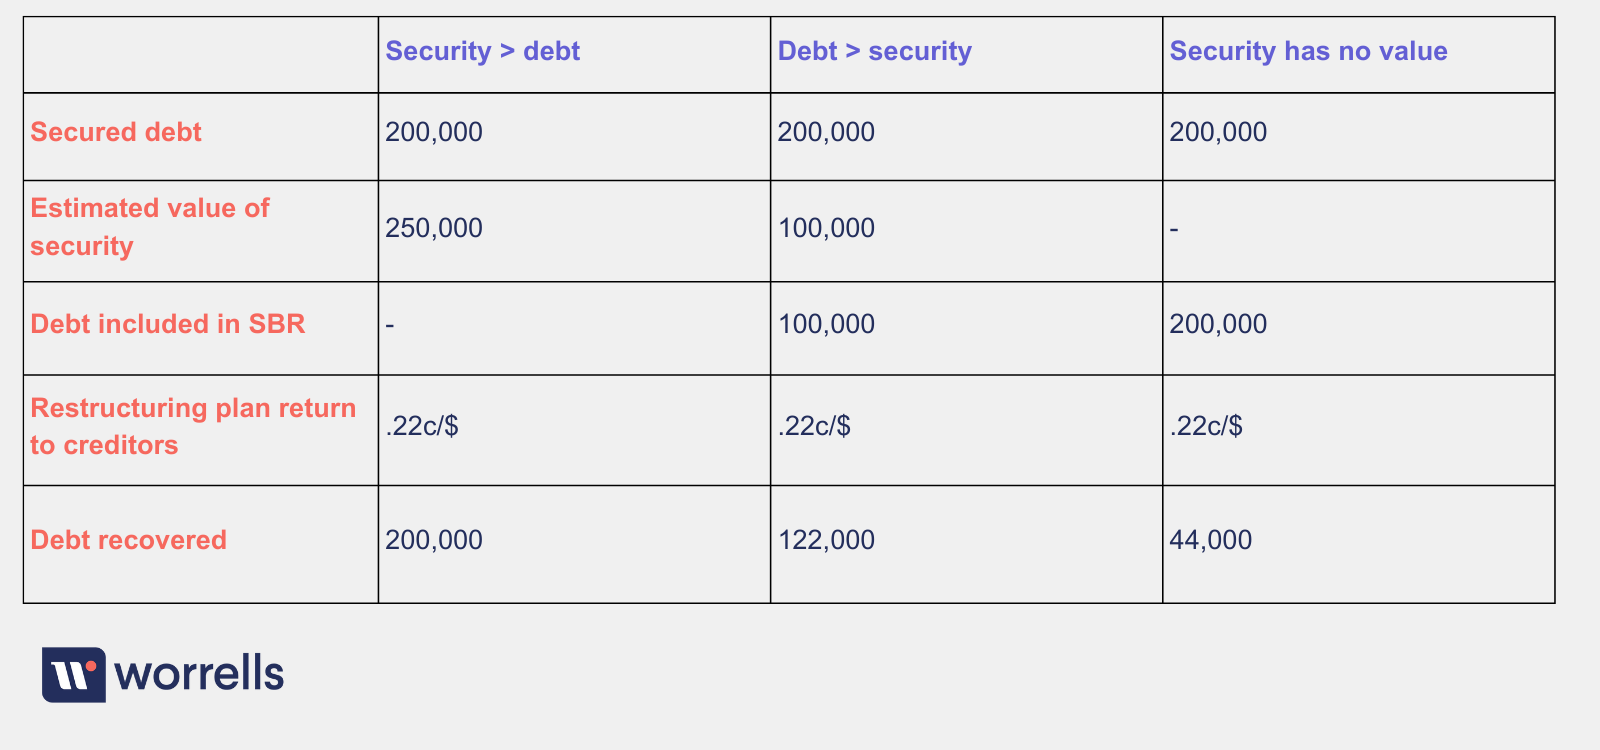 Table demonstrating how a secured creditor's debt is affected in different scenarios